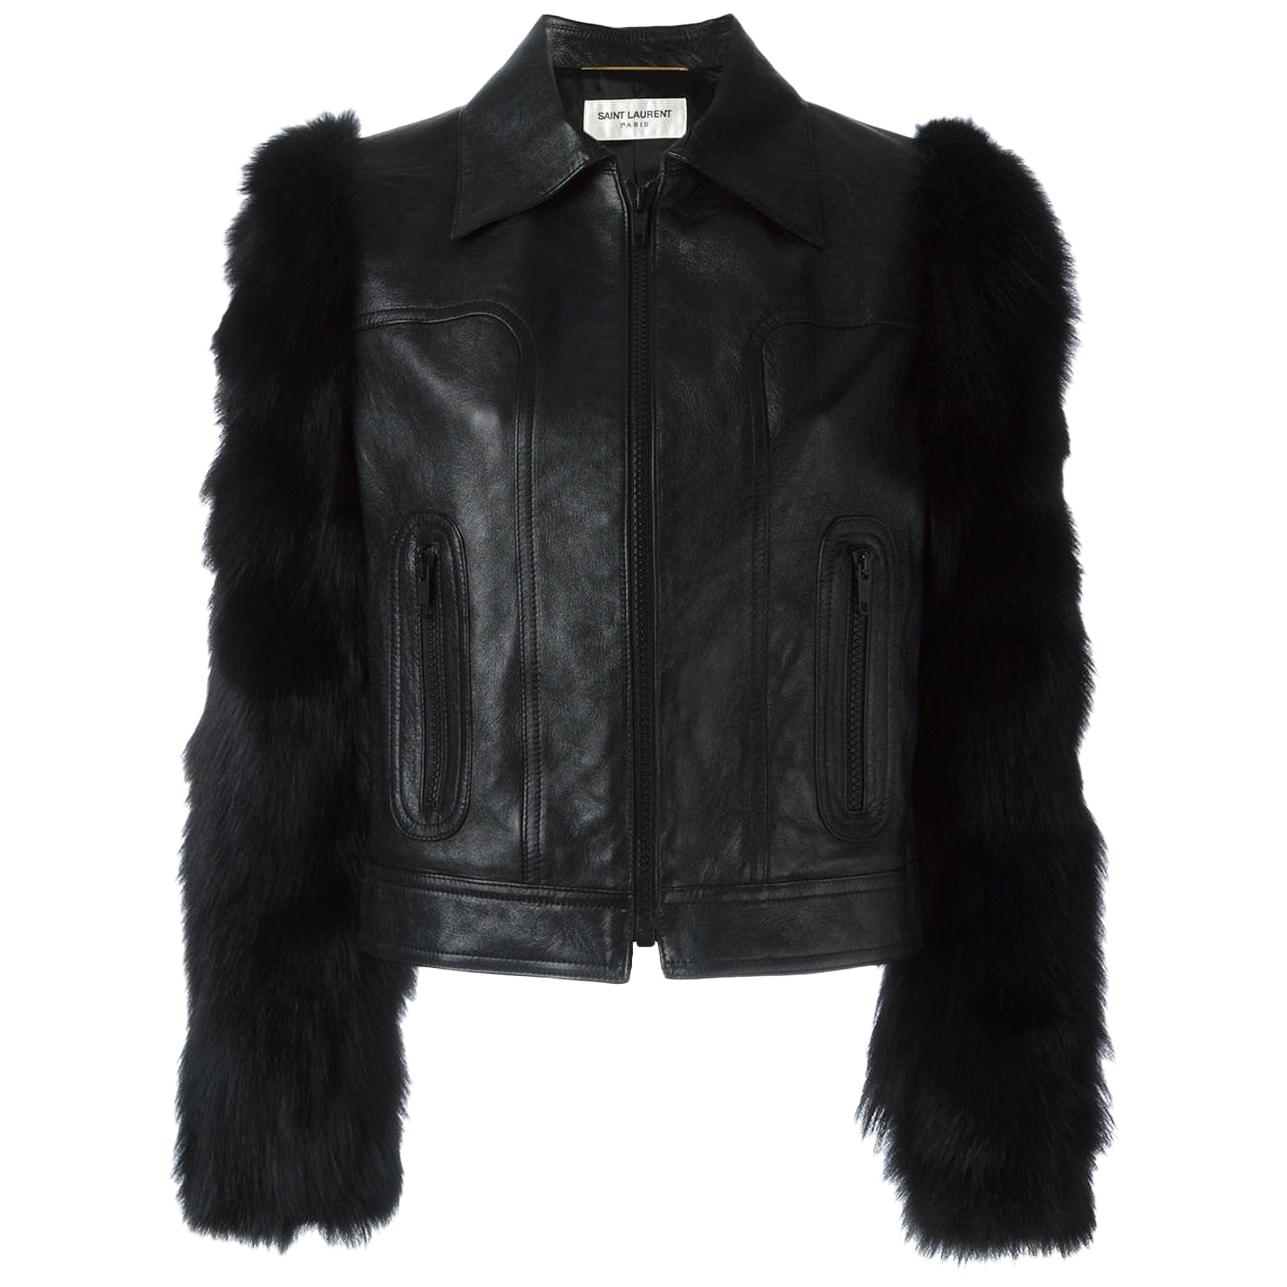 Saint Laurent Leather Jacket with Contrast Fox Fur Sleeves